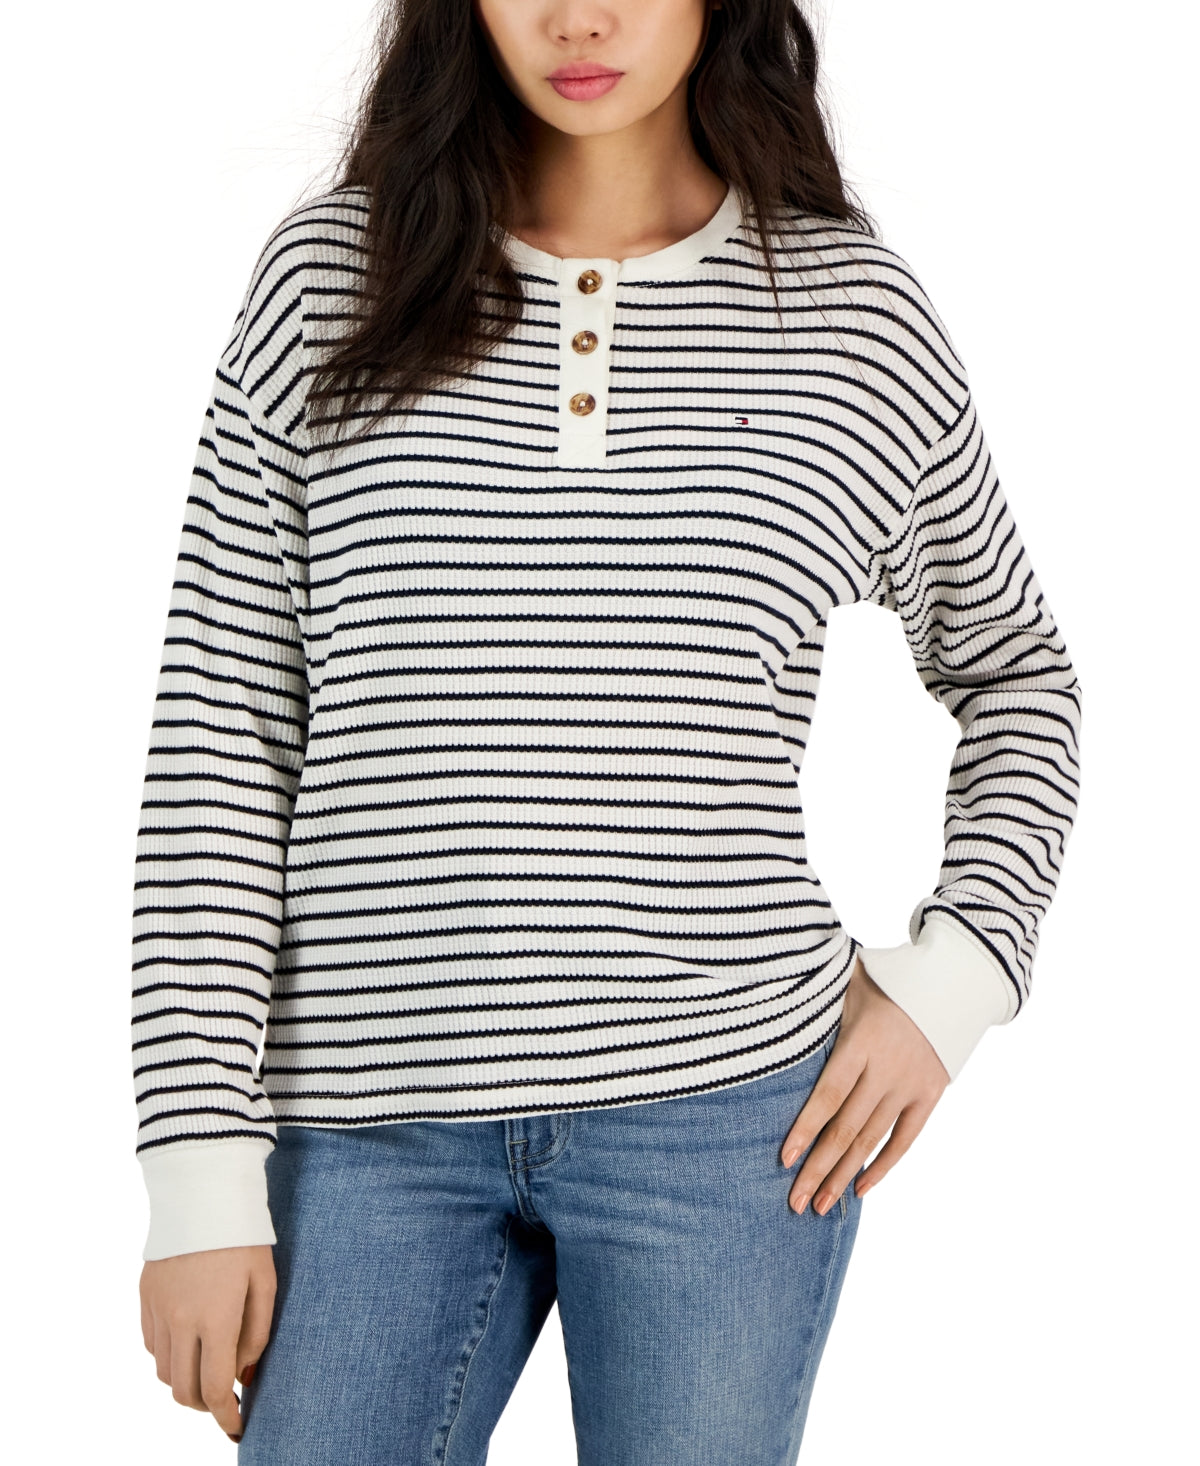 Tommy Hilfiger Women's Long Sleeve Striped Boxy Henley Top White Size X-Small